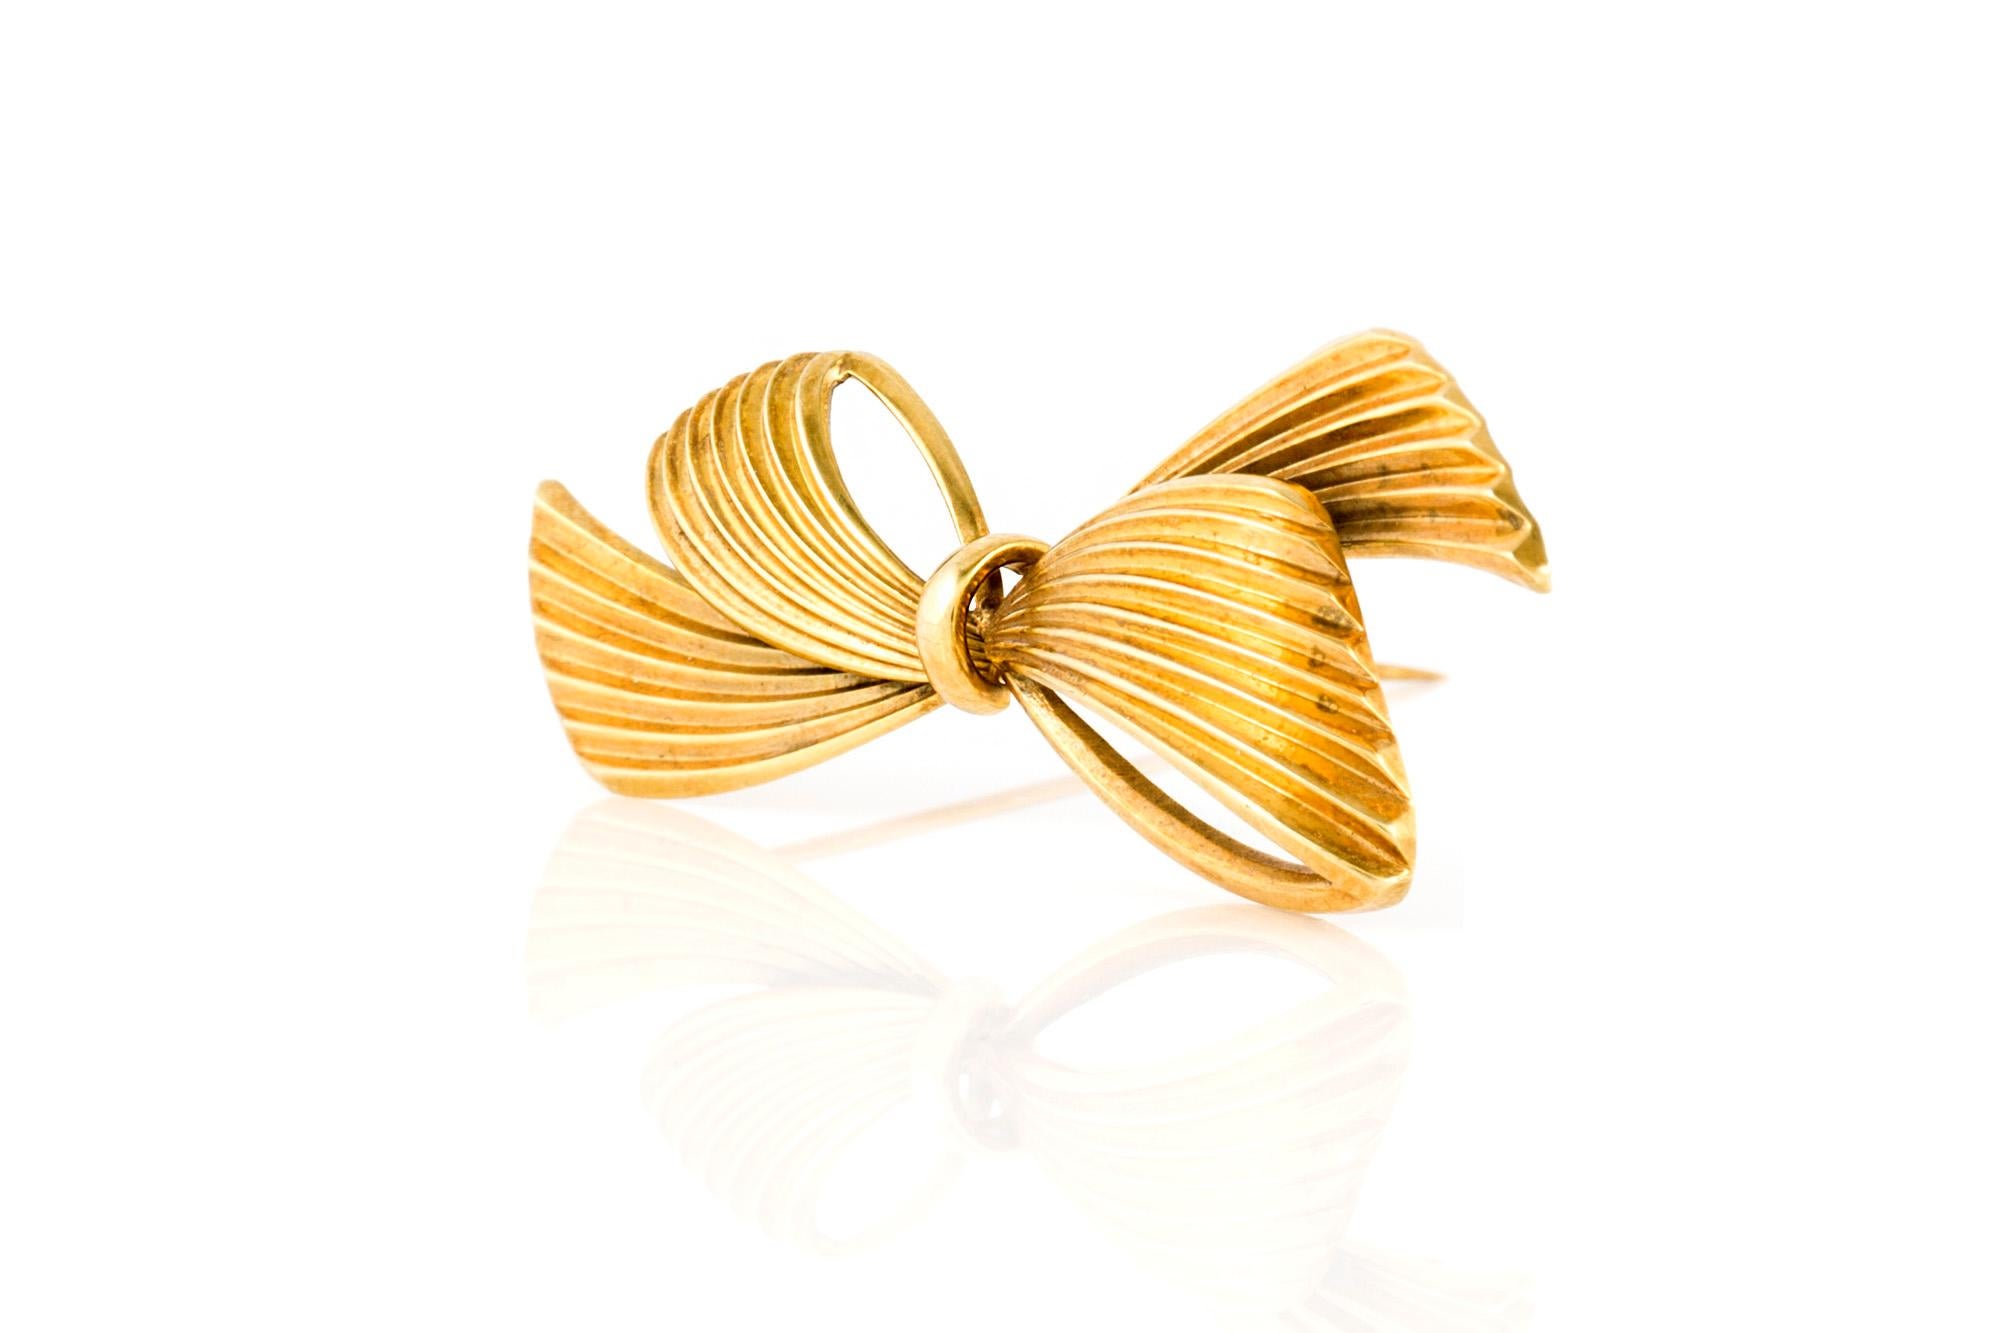 The brooch is finely crafted in 14k yellow gold and weighing approximately total of 4.00 dwt.

Sign by Tiffany & Co